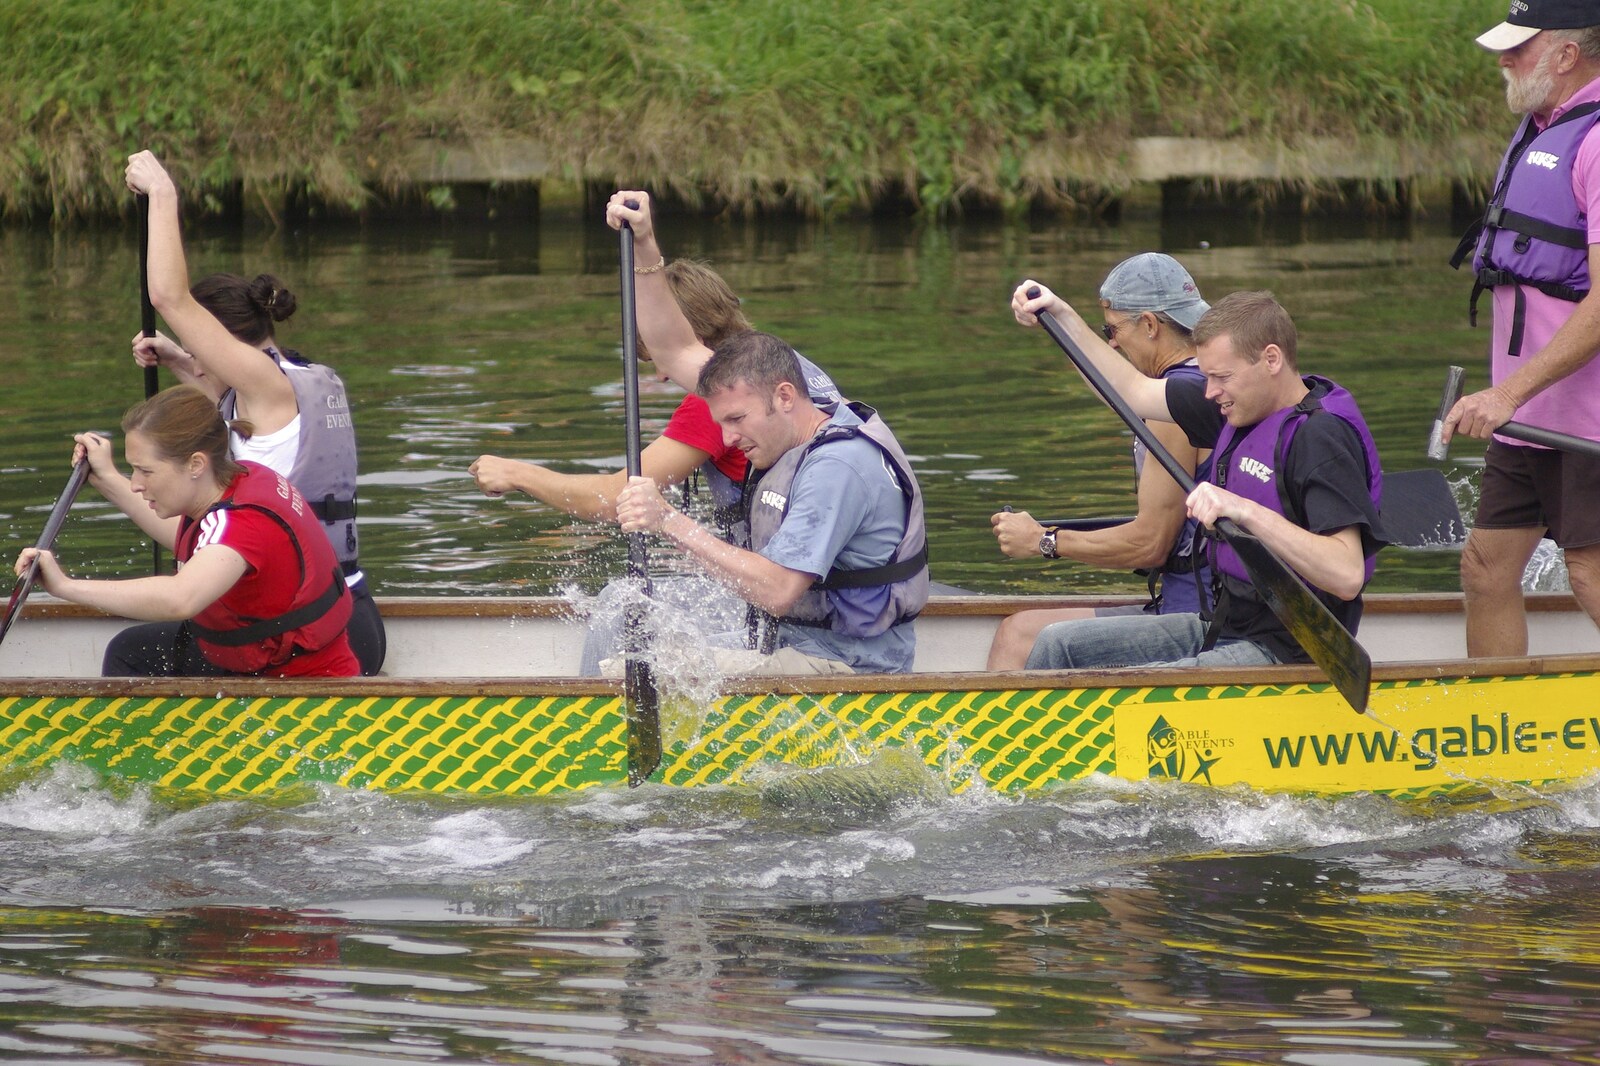 Qualcomm's Dragon-Boat Racing, Fen Ditton, Cambridge - 8th September 2007: A team of paddlers goes past